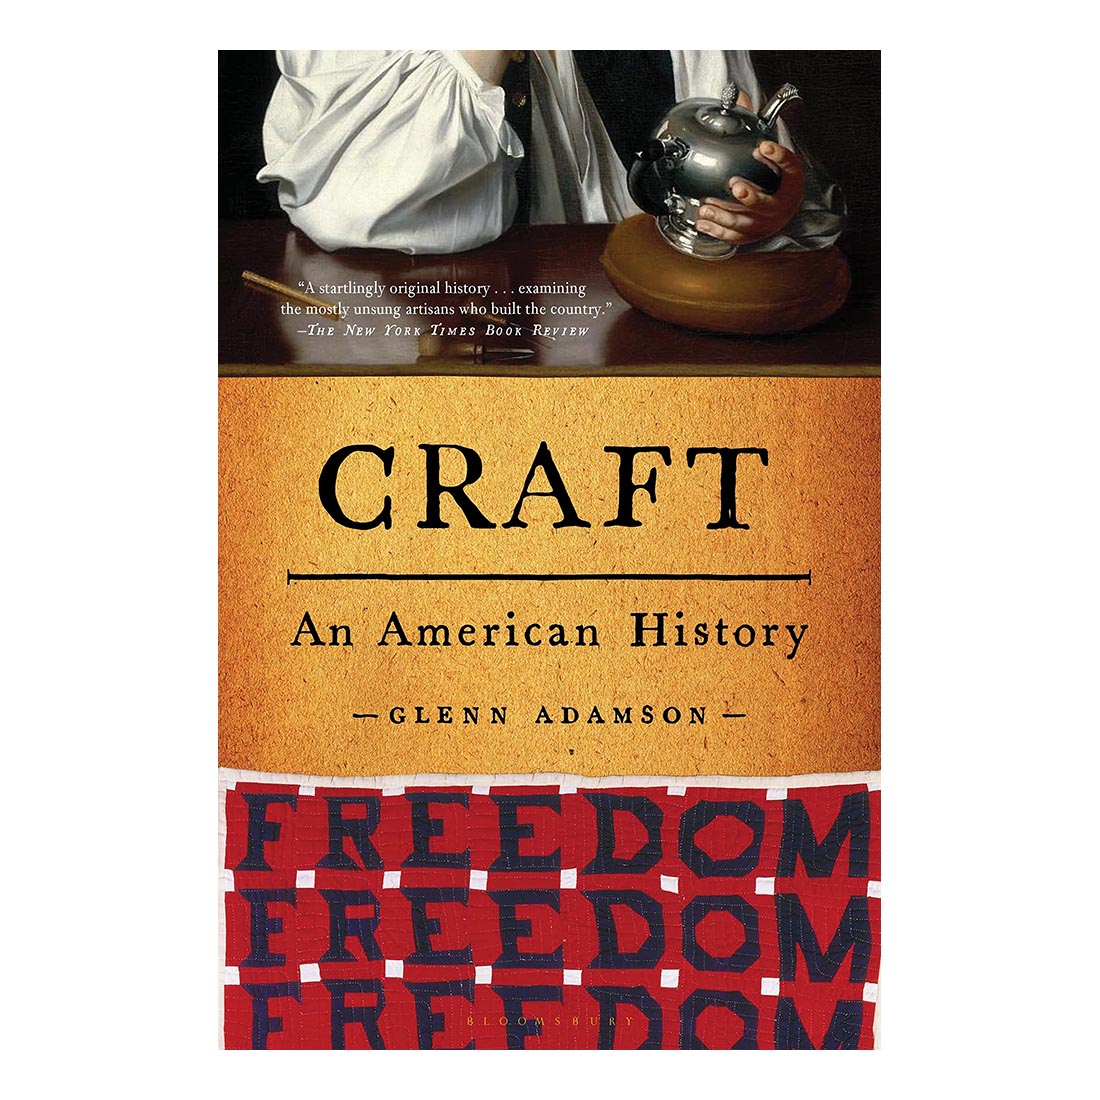 Craft: An American History